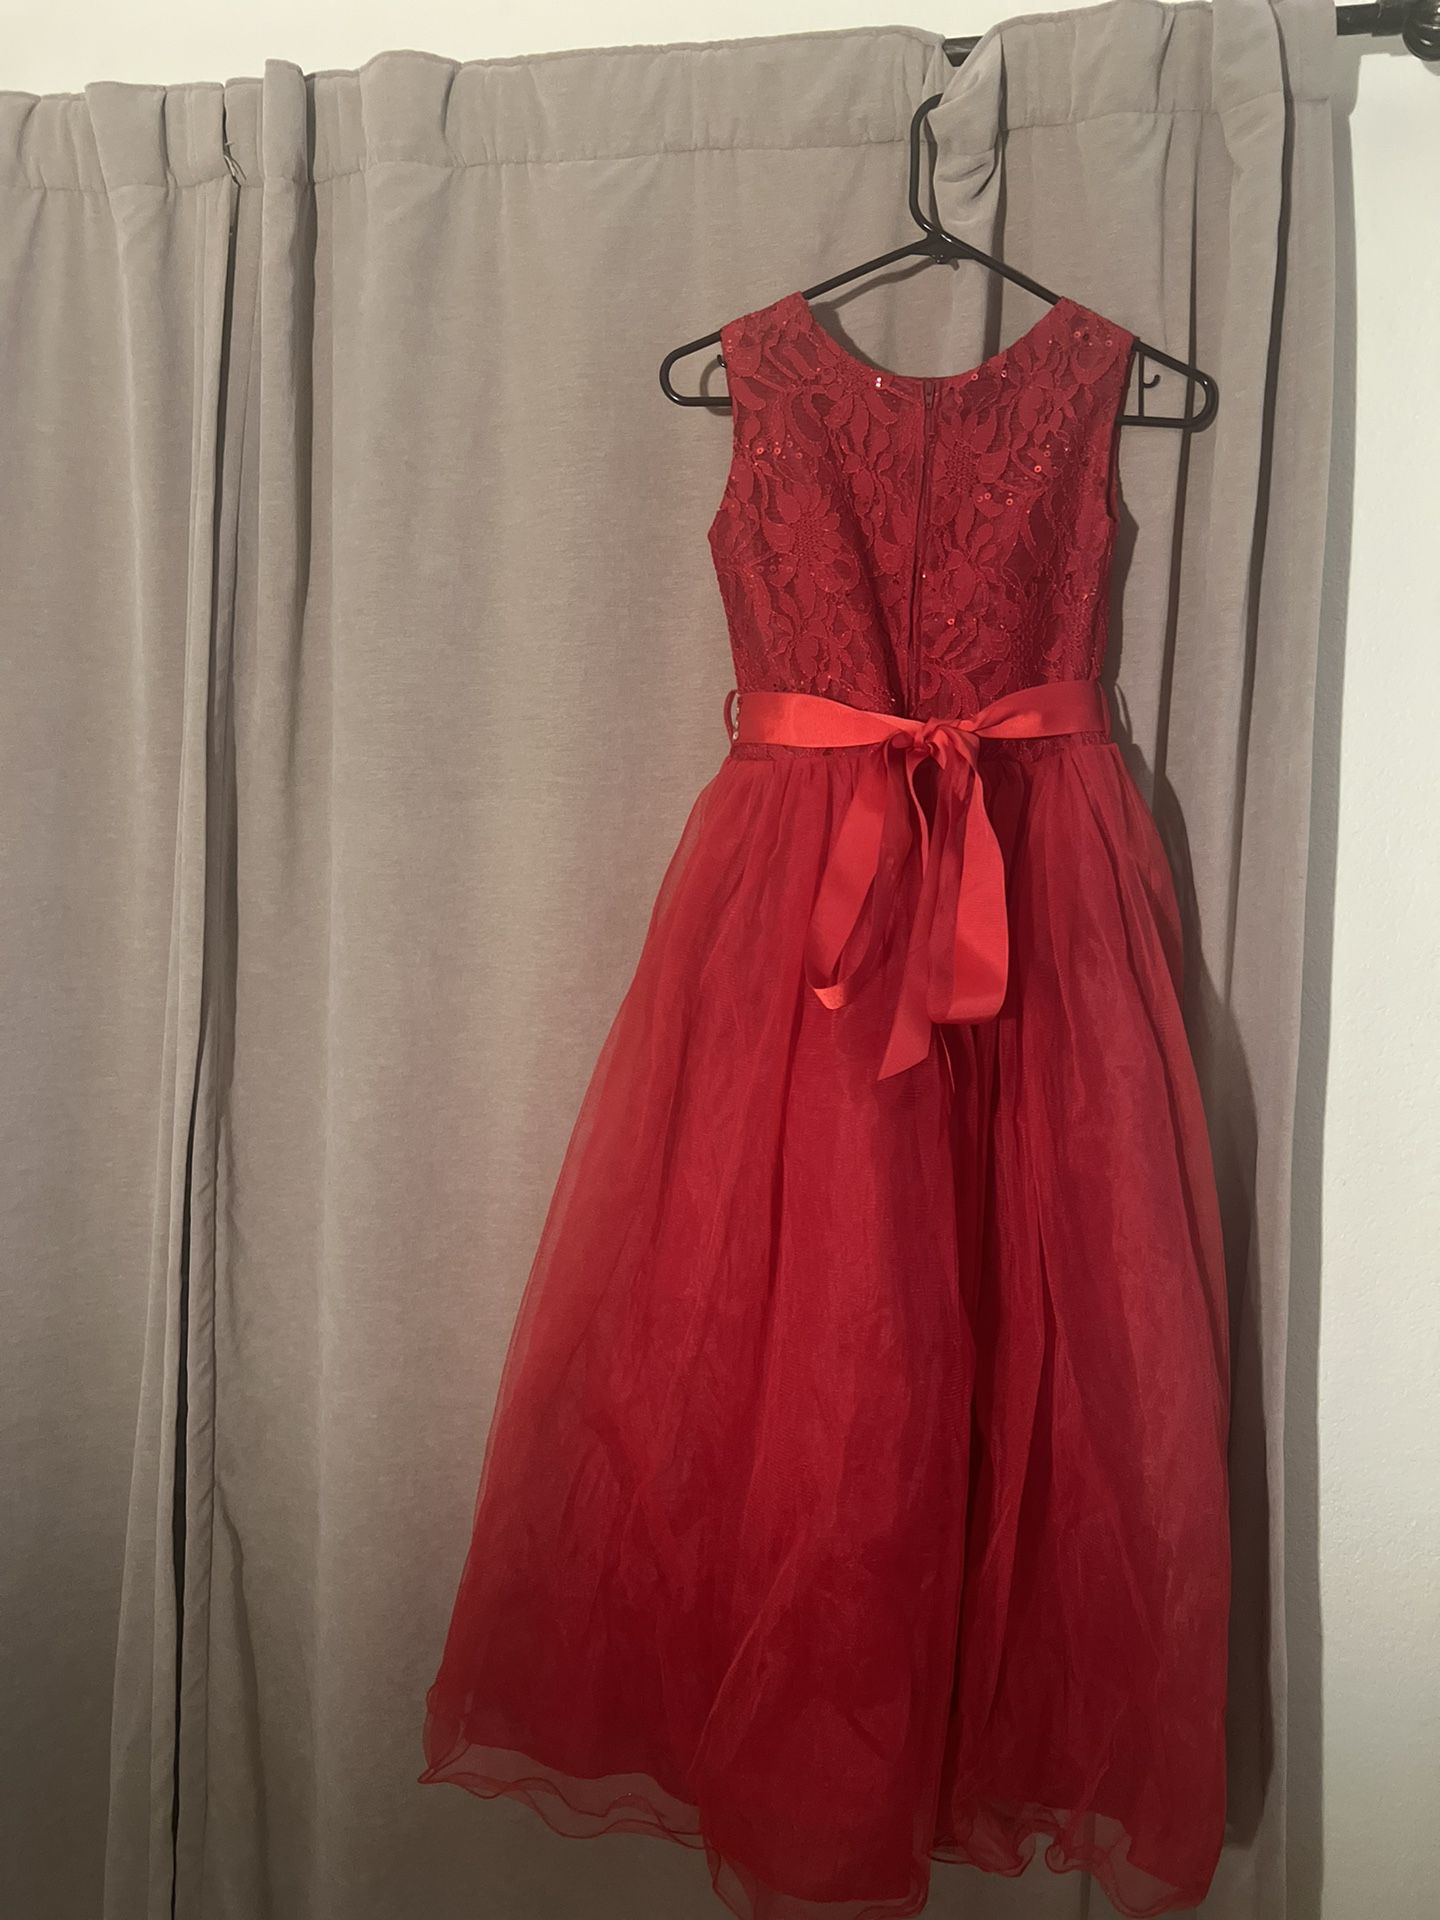 Girls red Princess Tulle Lace Flower Dress